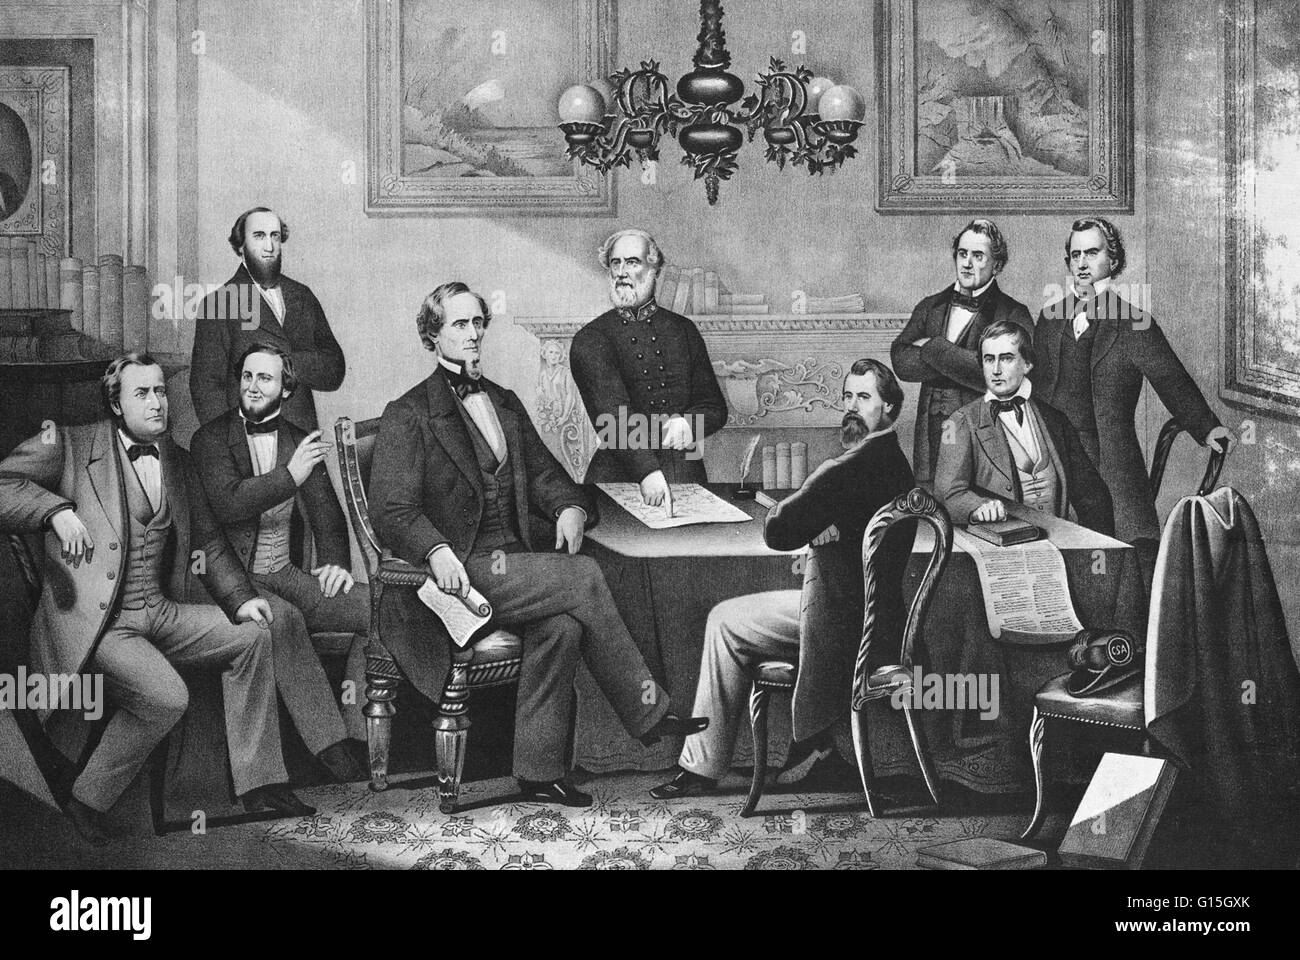 President Jefferson Davis and cabinet of the Confederate States of America, and Confederate general Robert E. Lee, shortly after the beginning of the American Civil War (1861-1865). Depicted are, from left to right: Stephen Mallory, secretary of the navy; Stock Photo